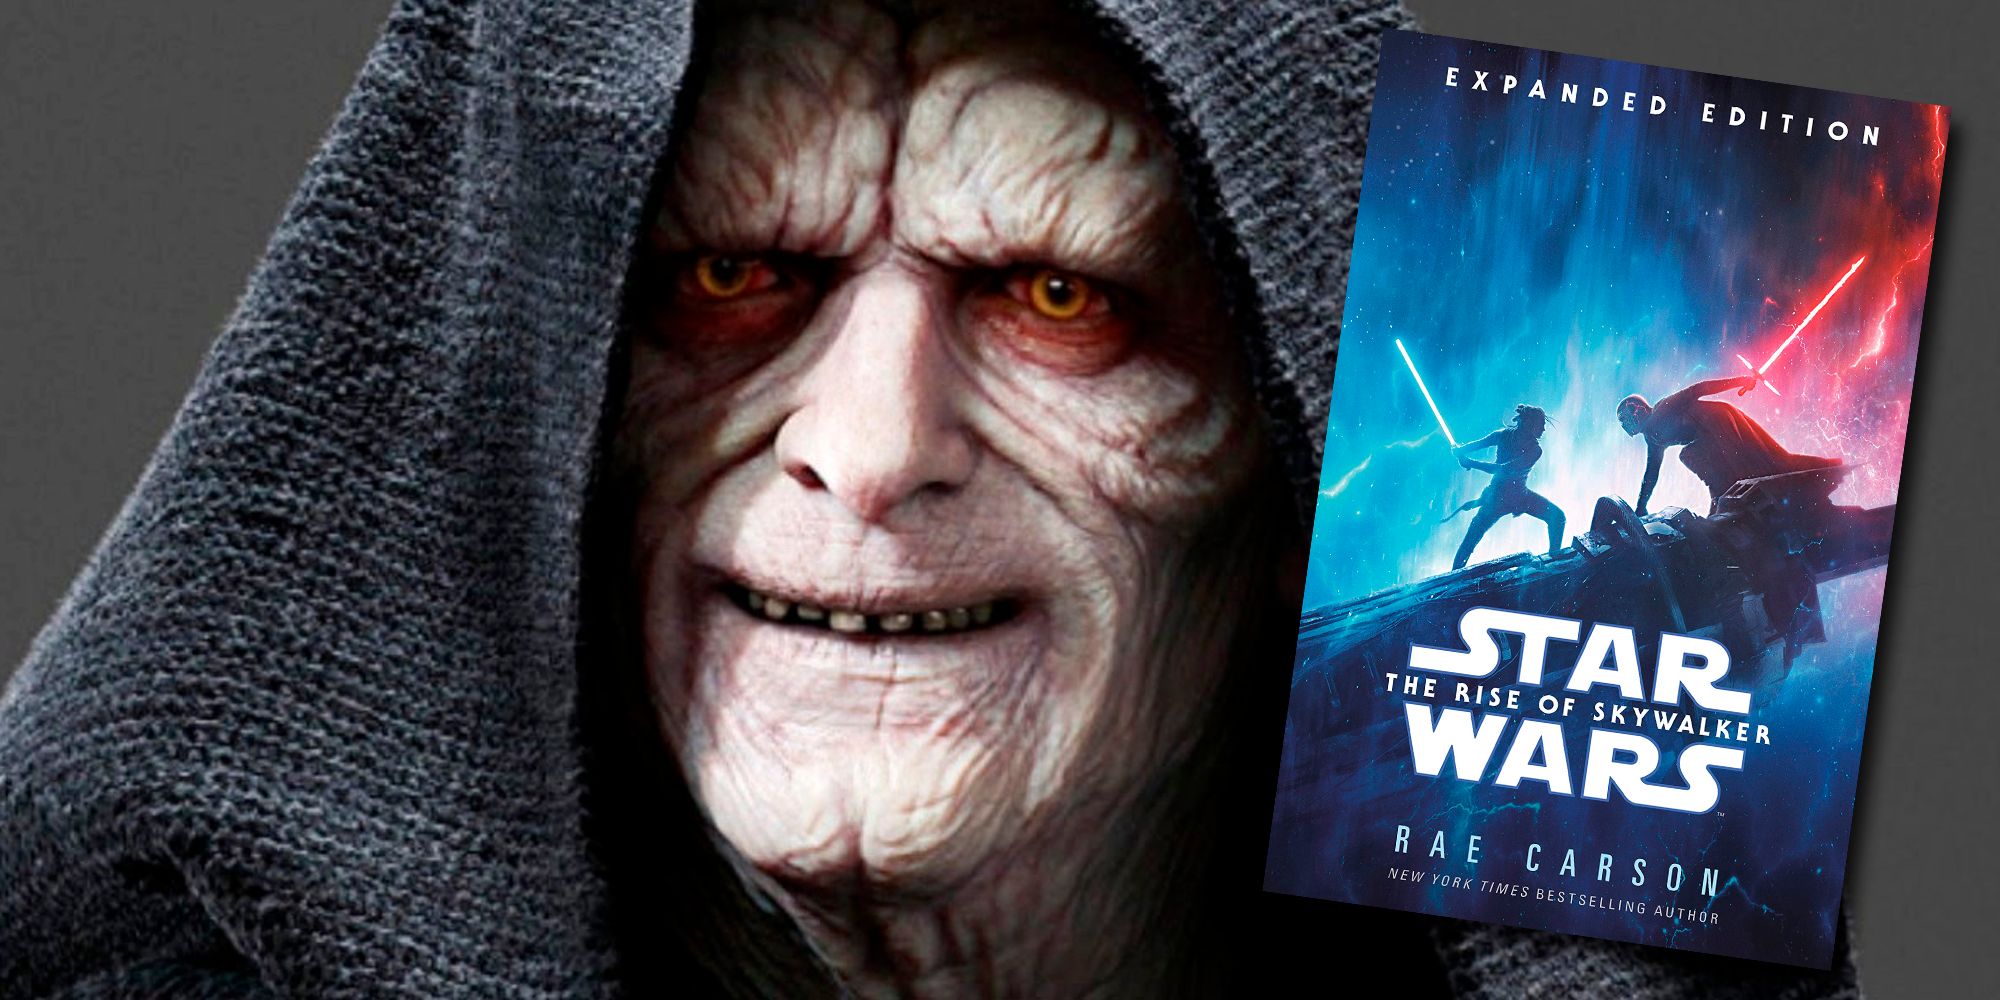 The Rise of Skywalker novel set up Emperor Palpatine return but it was too late